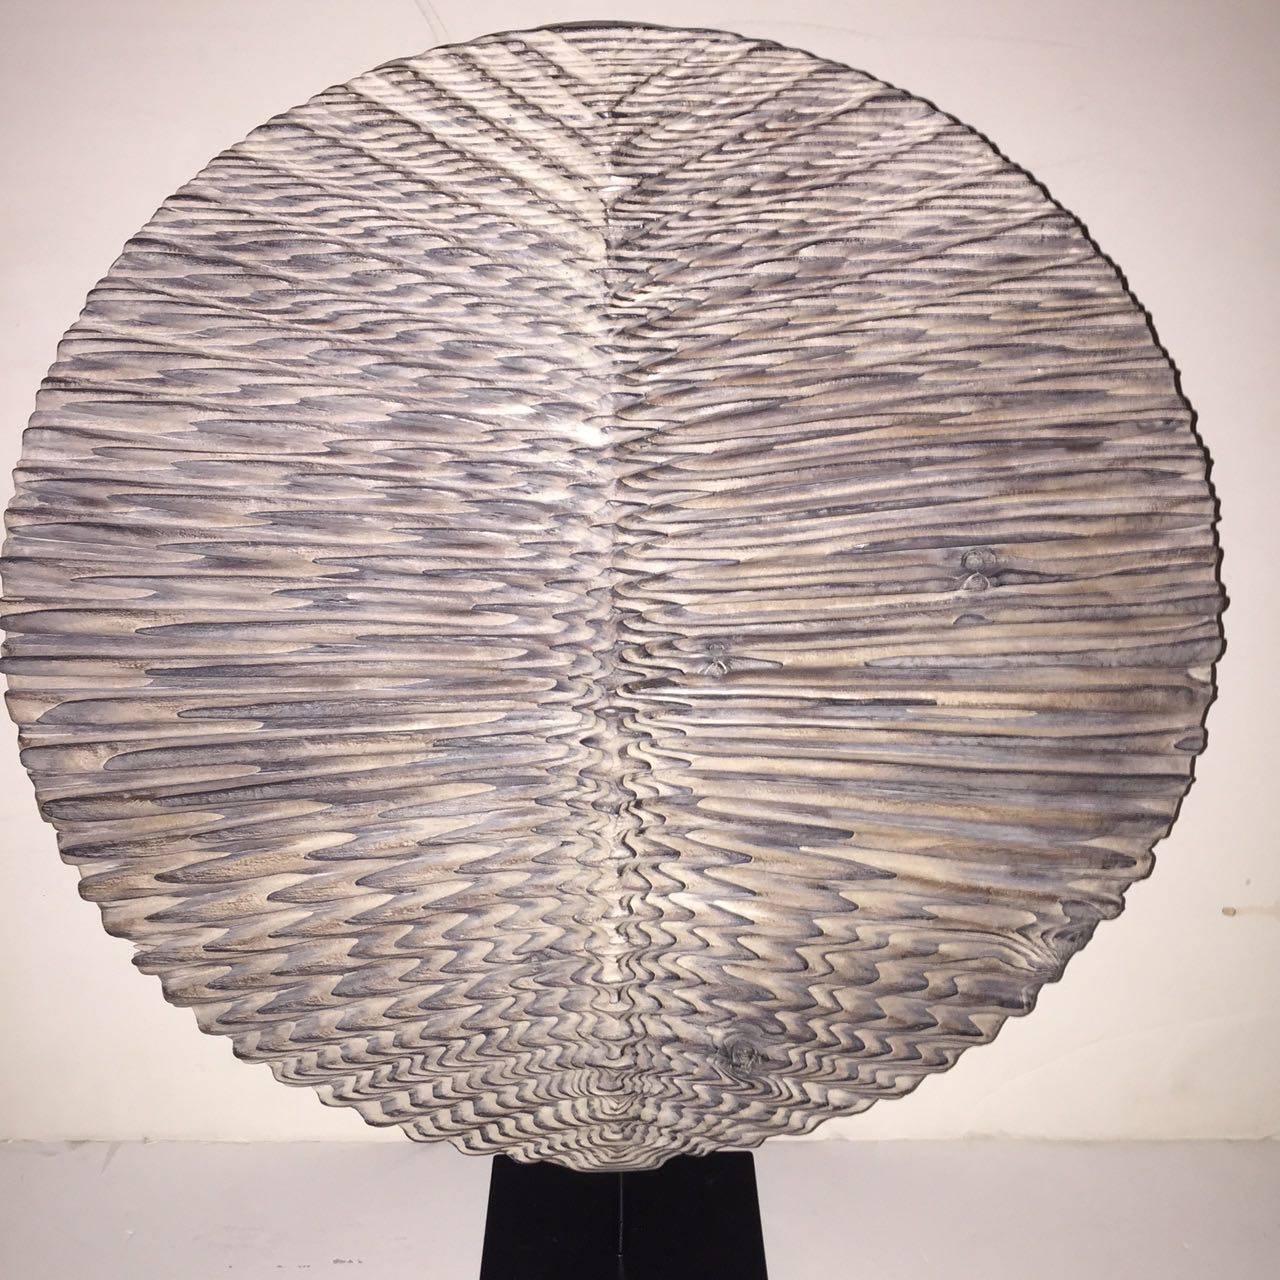 Hand-carved contemporary wood disc sculpture from France.
Made from Douglas Fir.
